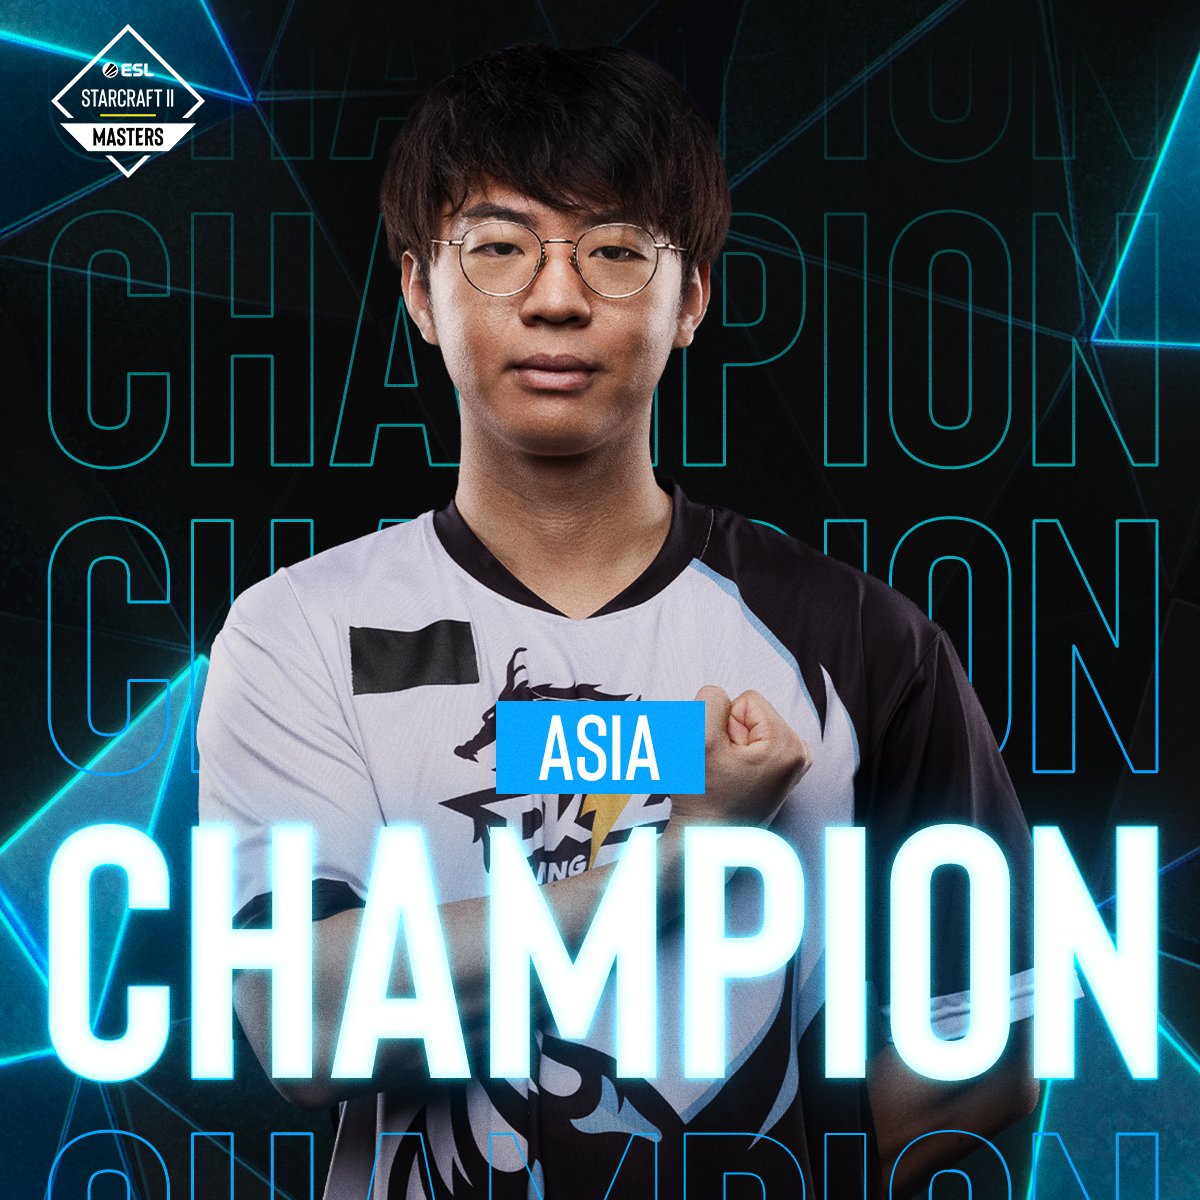 🏆 AND THERE YOU HAVE YOUR ASIA REGIONAL CHAMPION! 🏆 With this, Oliveira gets a hat-trick in the 2023/2024 season of EPT, reigning supreme in Asia in ESL SC2 Masters Summer, Winter, and Spring! 👏👏👏